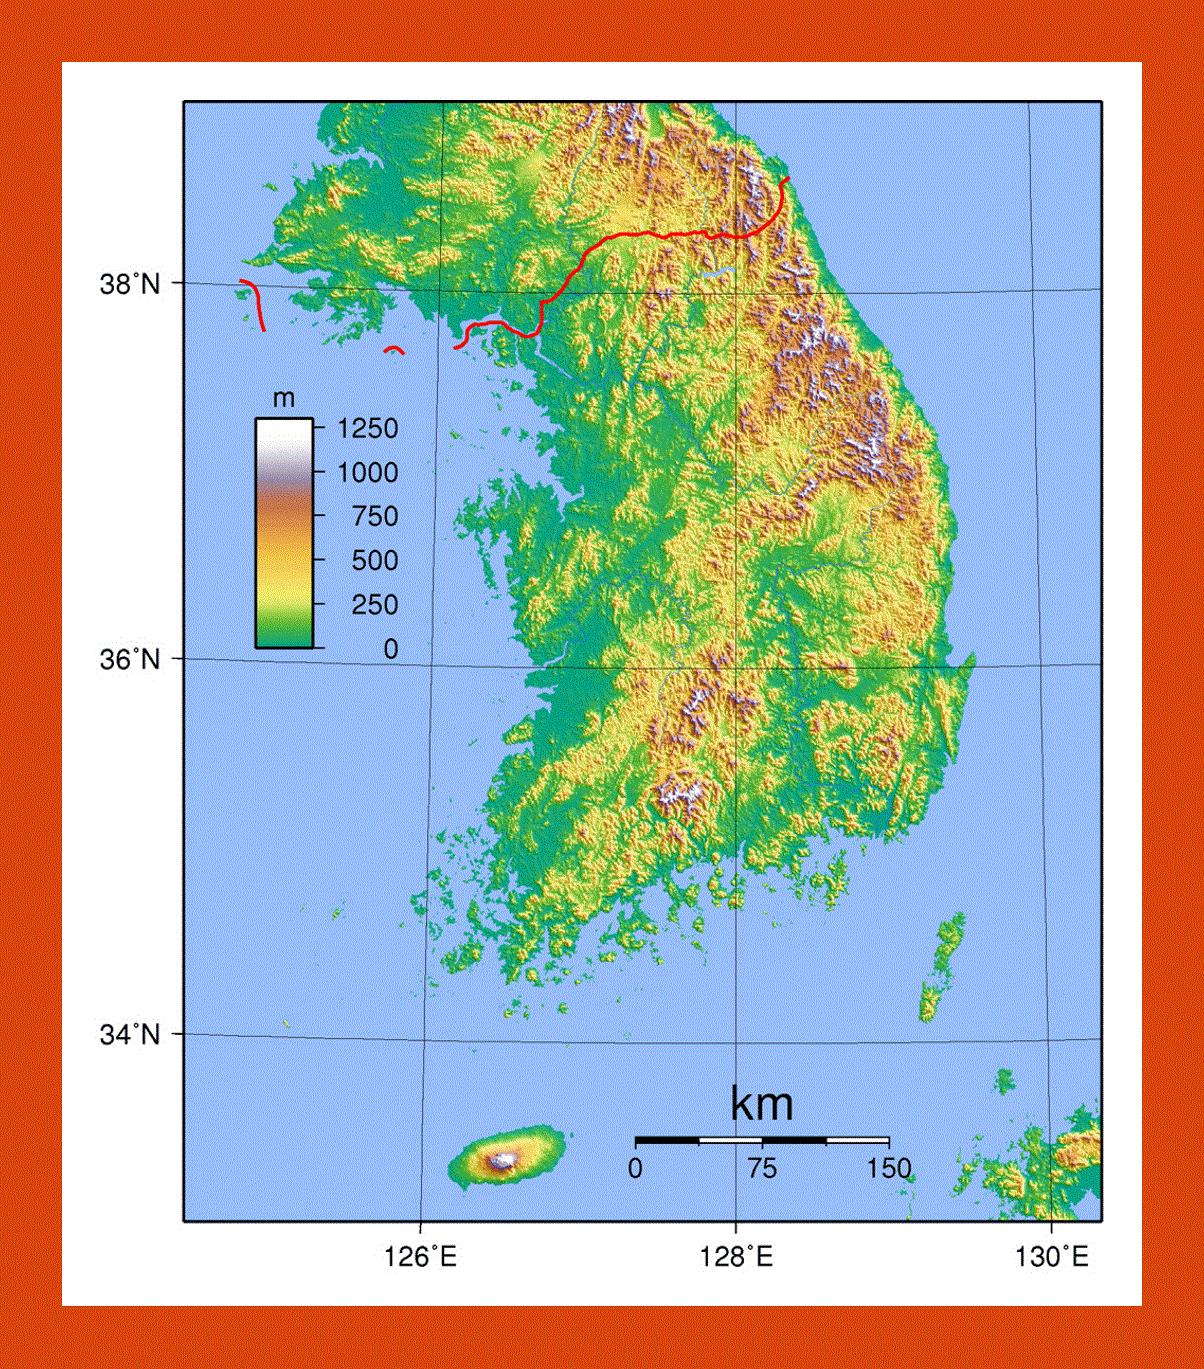 Physical map of South Korea